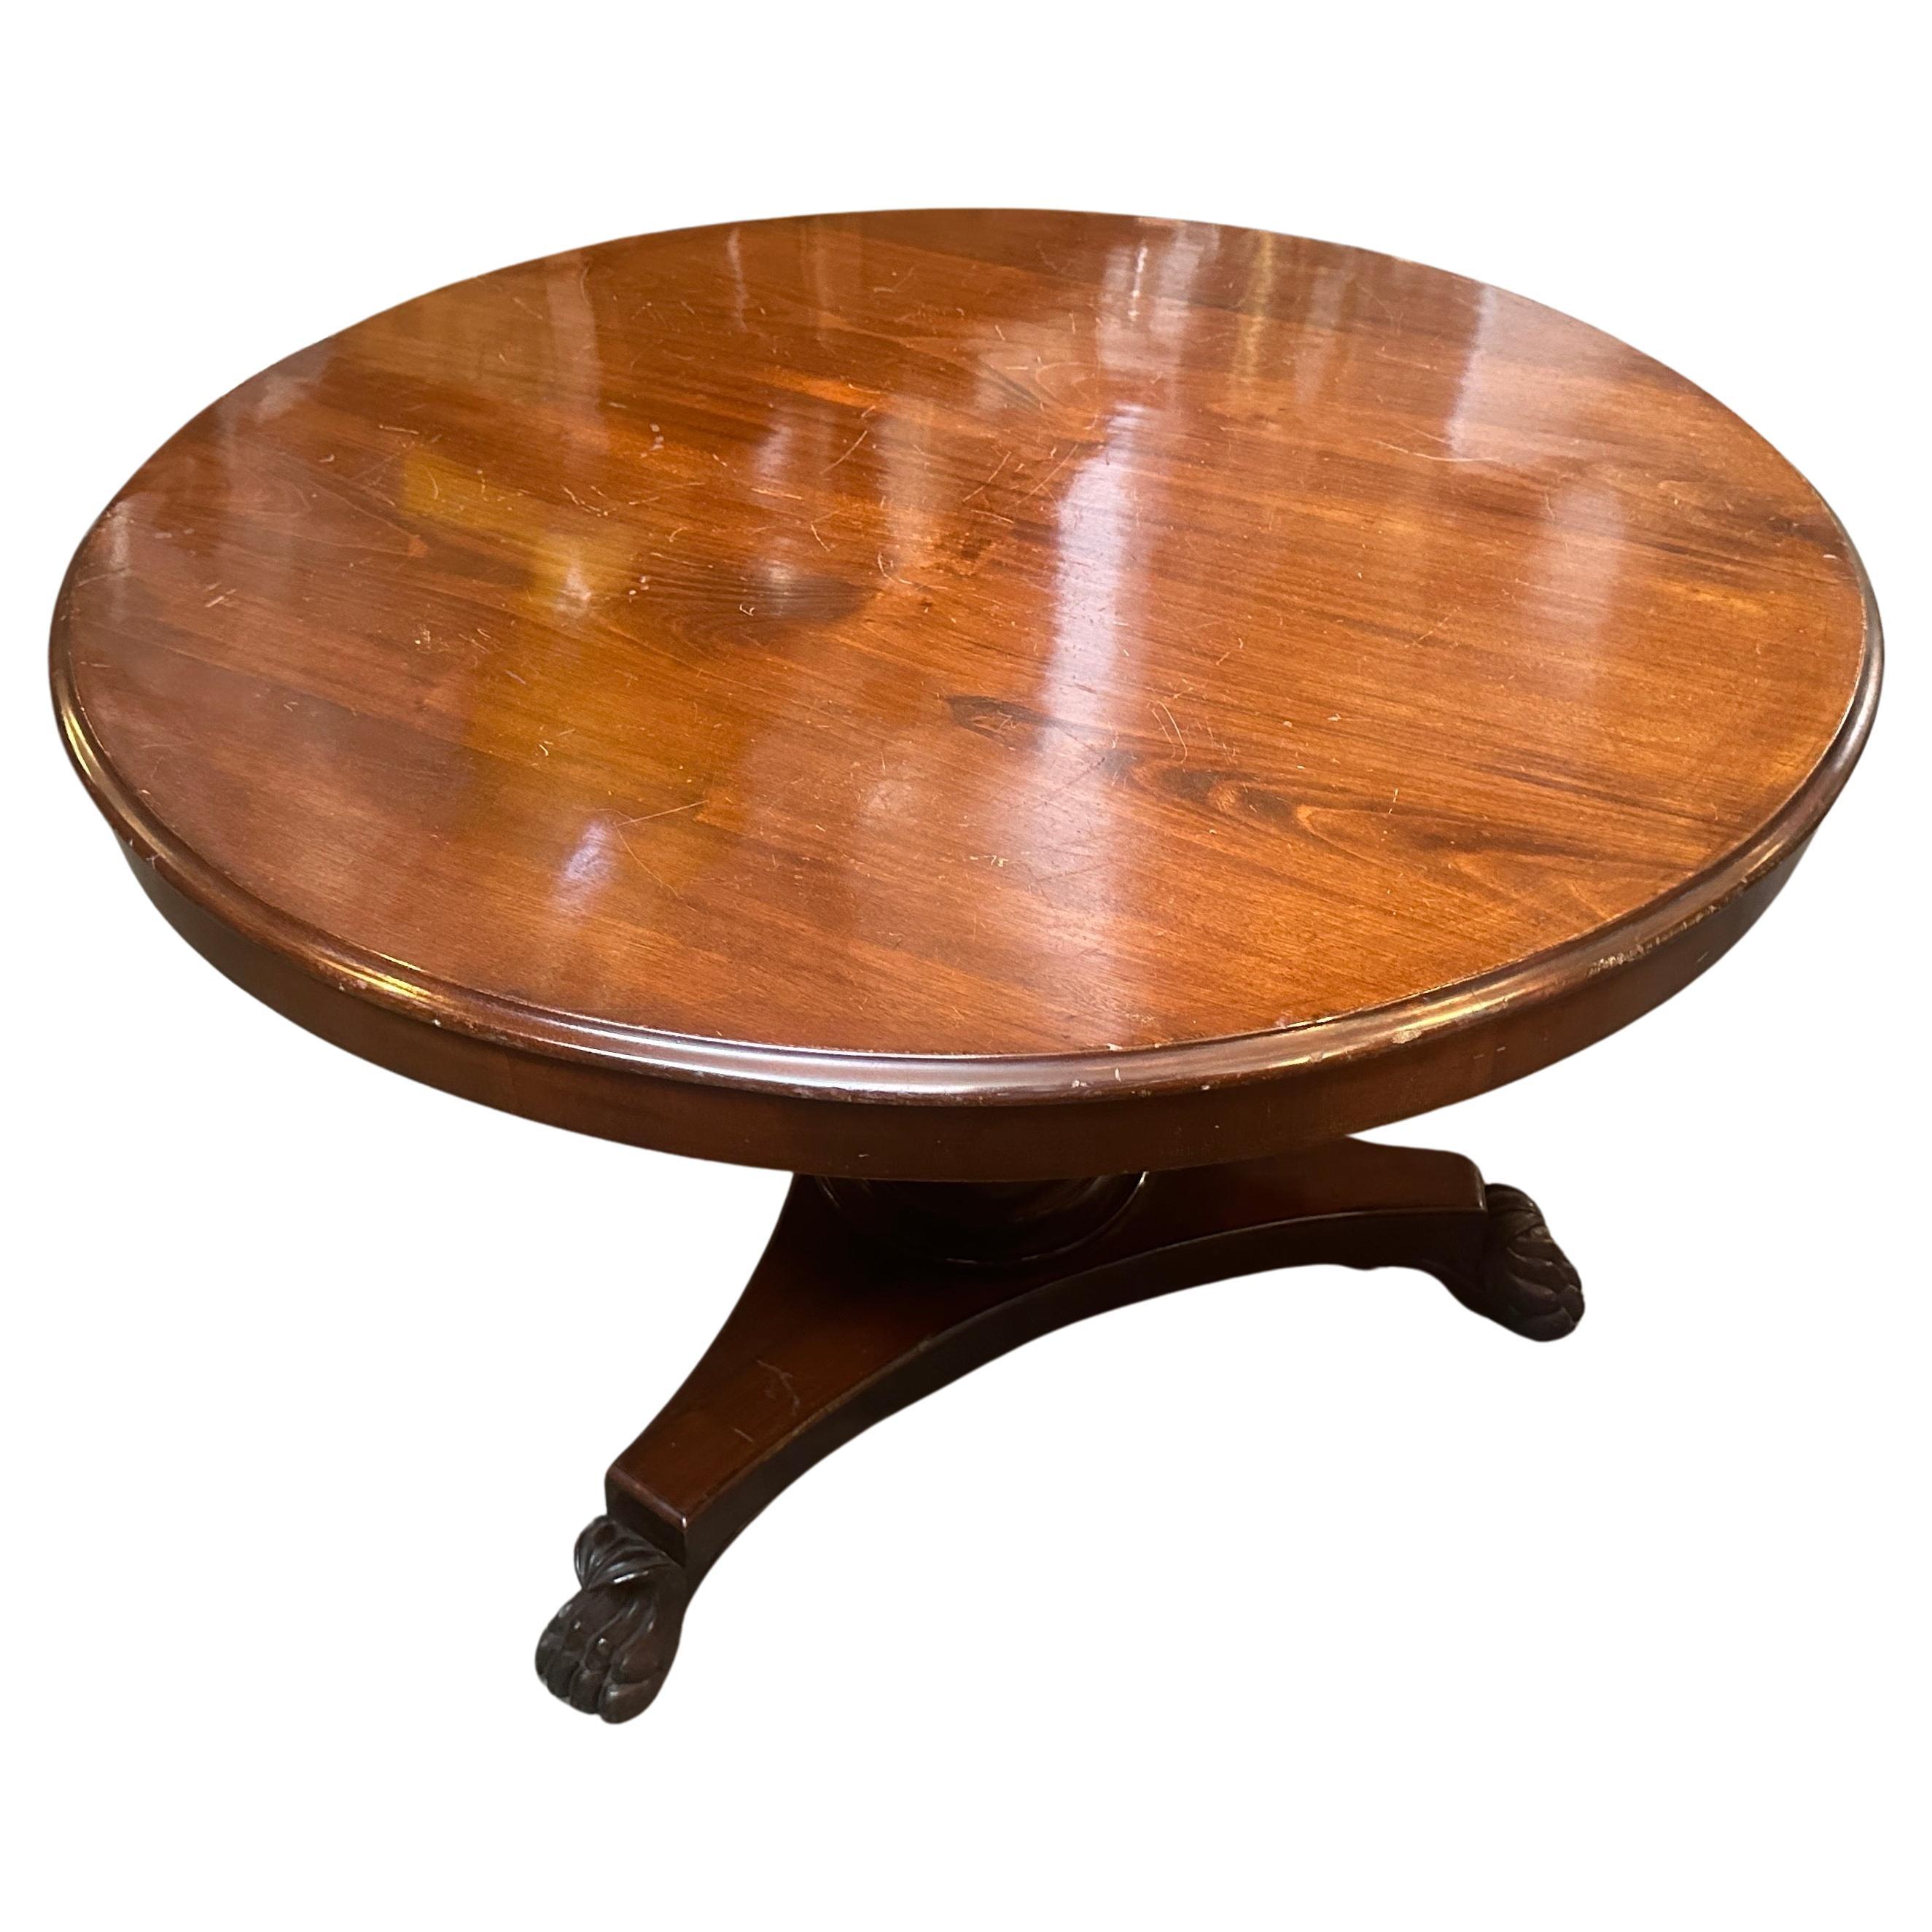 This Sicilian tilt-top table is a distinctive piece of furniture, reflecting the design aesthetics of the Empire style popular during the early to mid-19th century, it's a testament to the grandeur and elegance of the Empire style, featuring quality